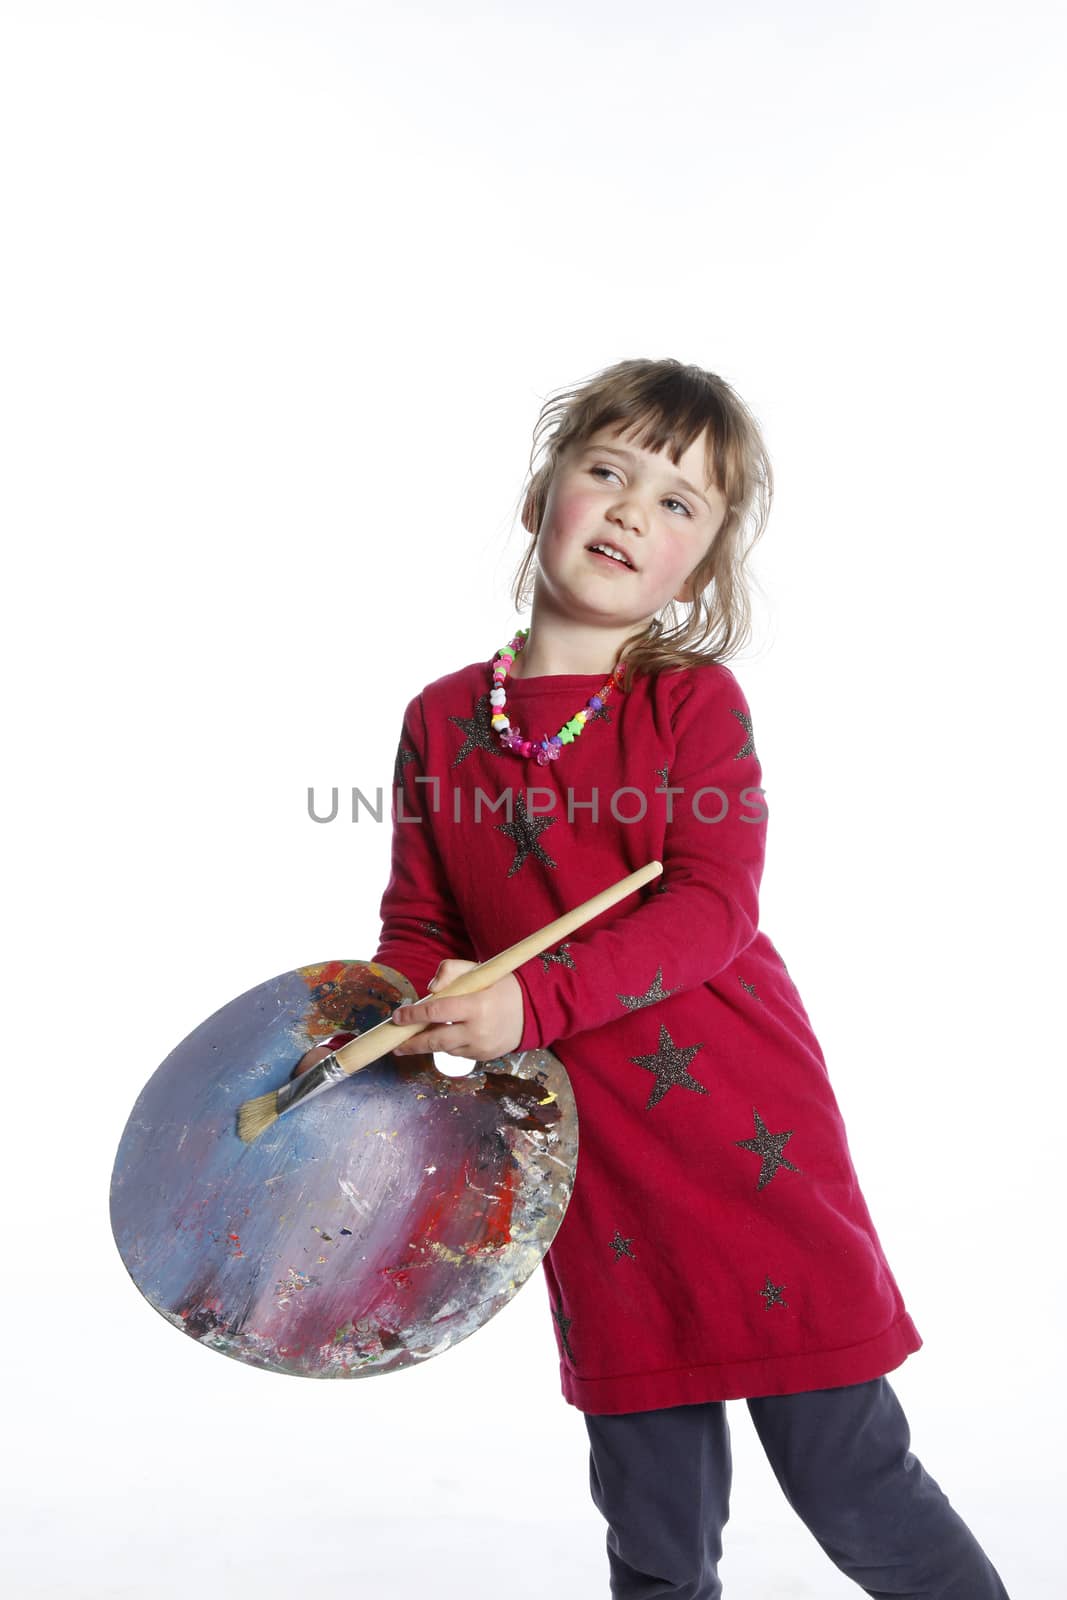 very young girl in red with brush and palette for painting in studio against white background